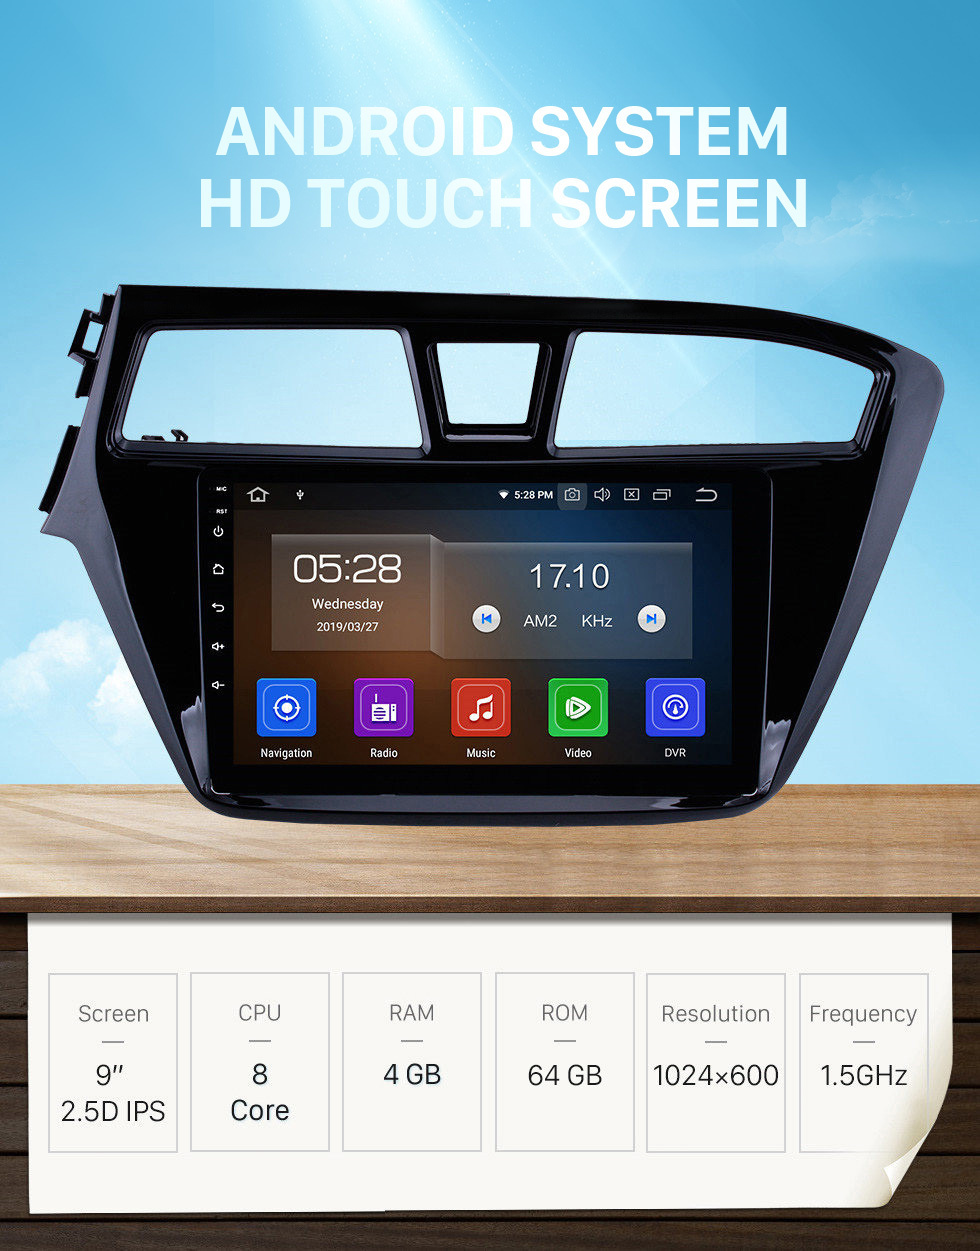 Seicane Aftermarket Android 11.0 navigation system Radio for 2014 2015 Hyundai i20 with Mirror link GPS HD 1024*600 touch screen OBD2 DVR Rearview camera TV 1080P Video 3G WIFI Steering Wheel Control Bluetooth USB SD